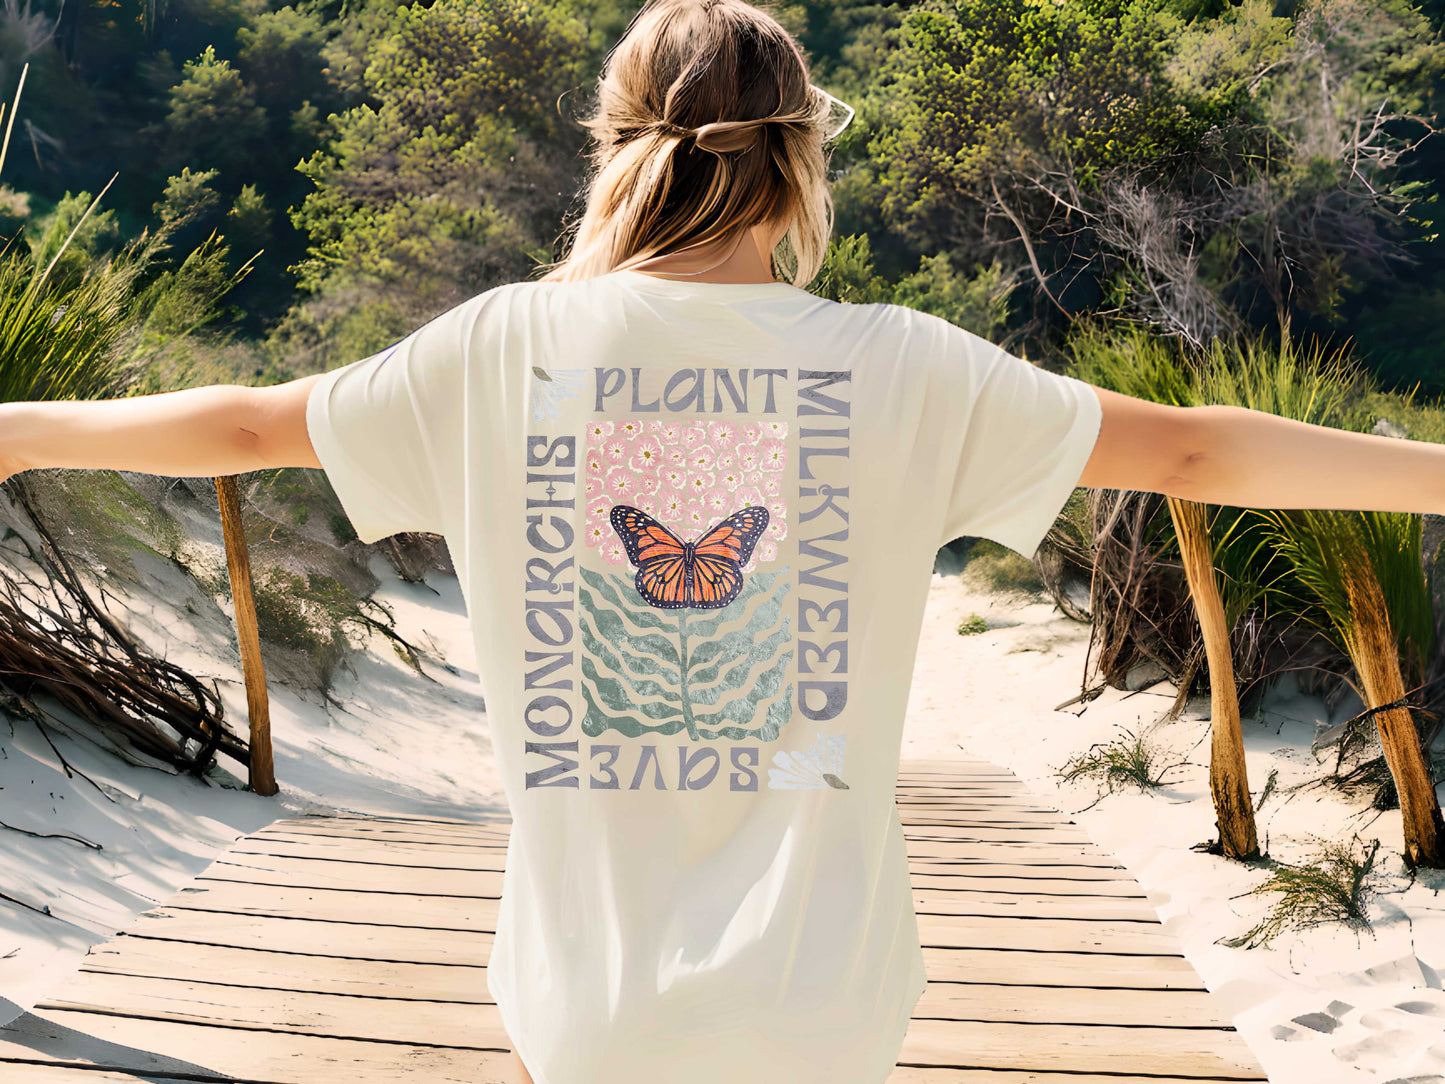 Save the Monarchs Plant Milkweed Conservation shirt. Spread the message about protecting our pollinators with amazing wearable art. 2 sides!